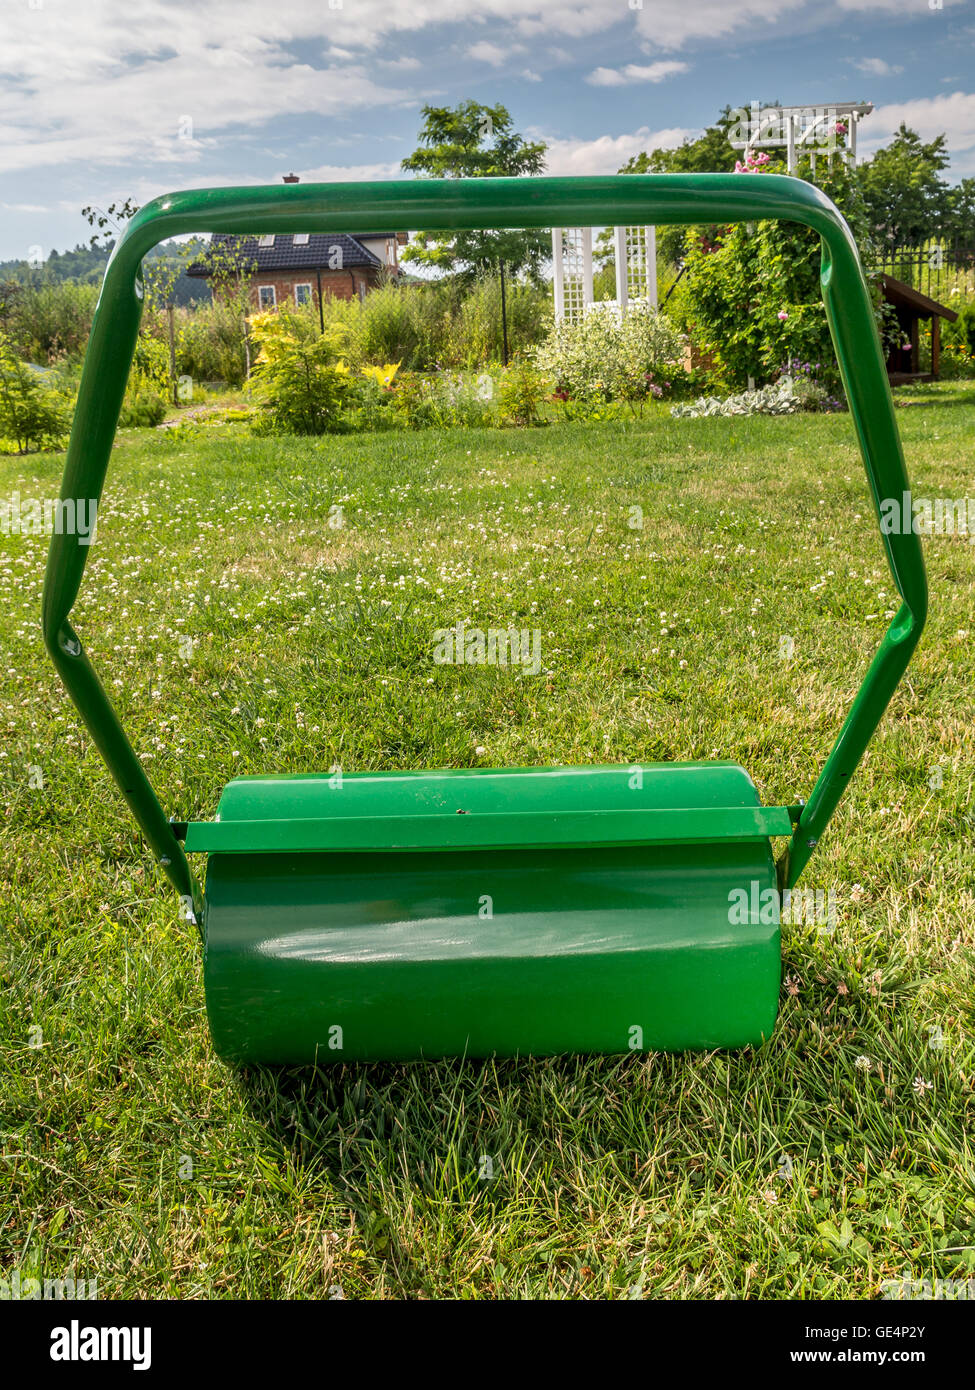 Green lawn roller ready to roll the garden lawn Stock Photo